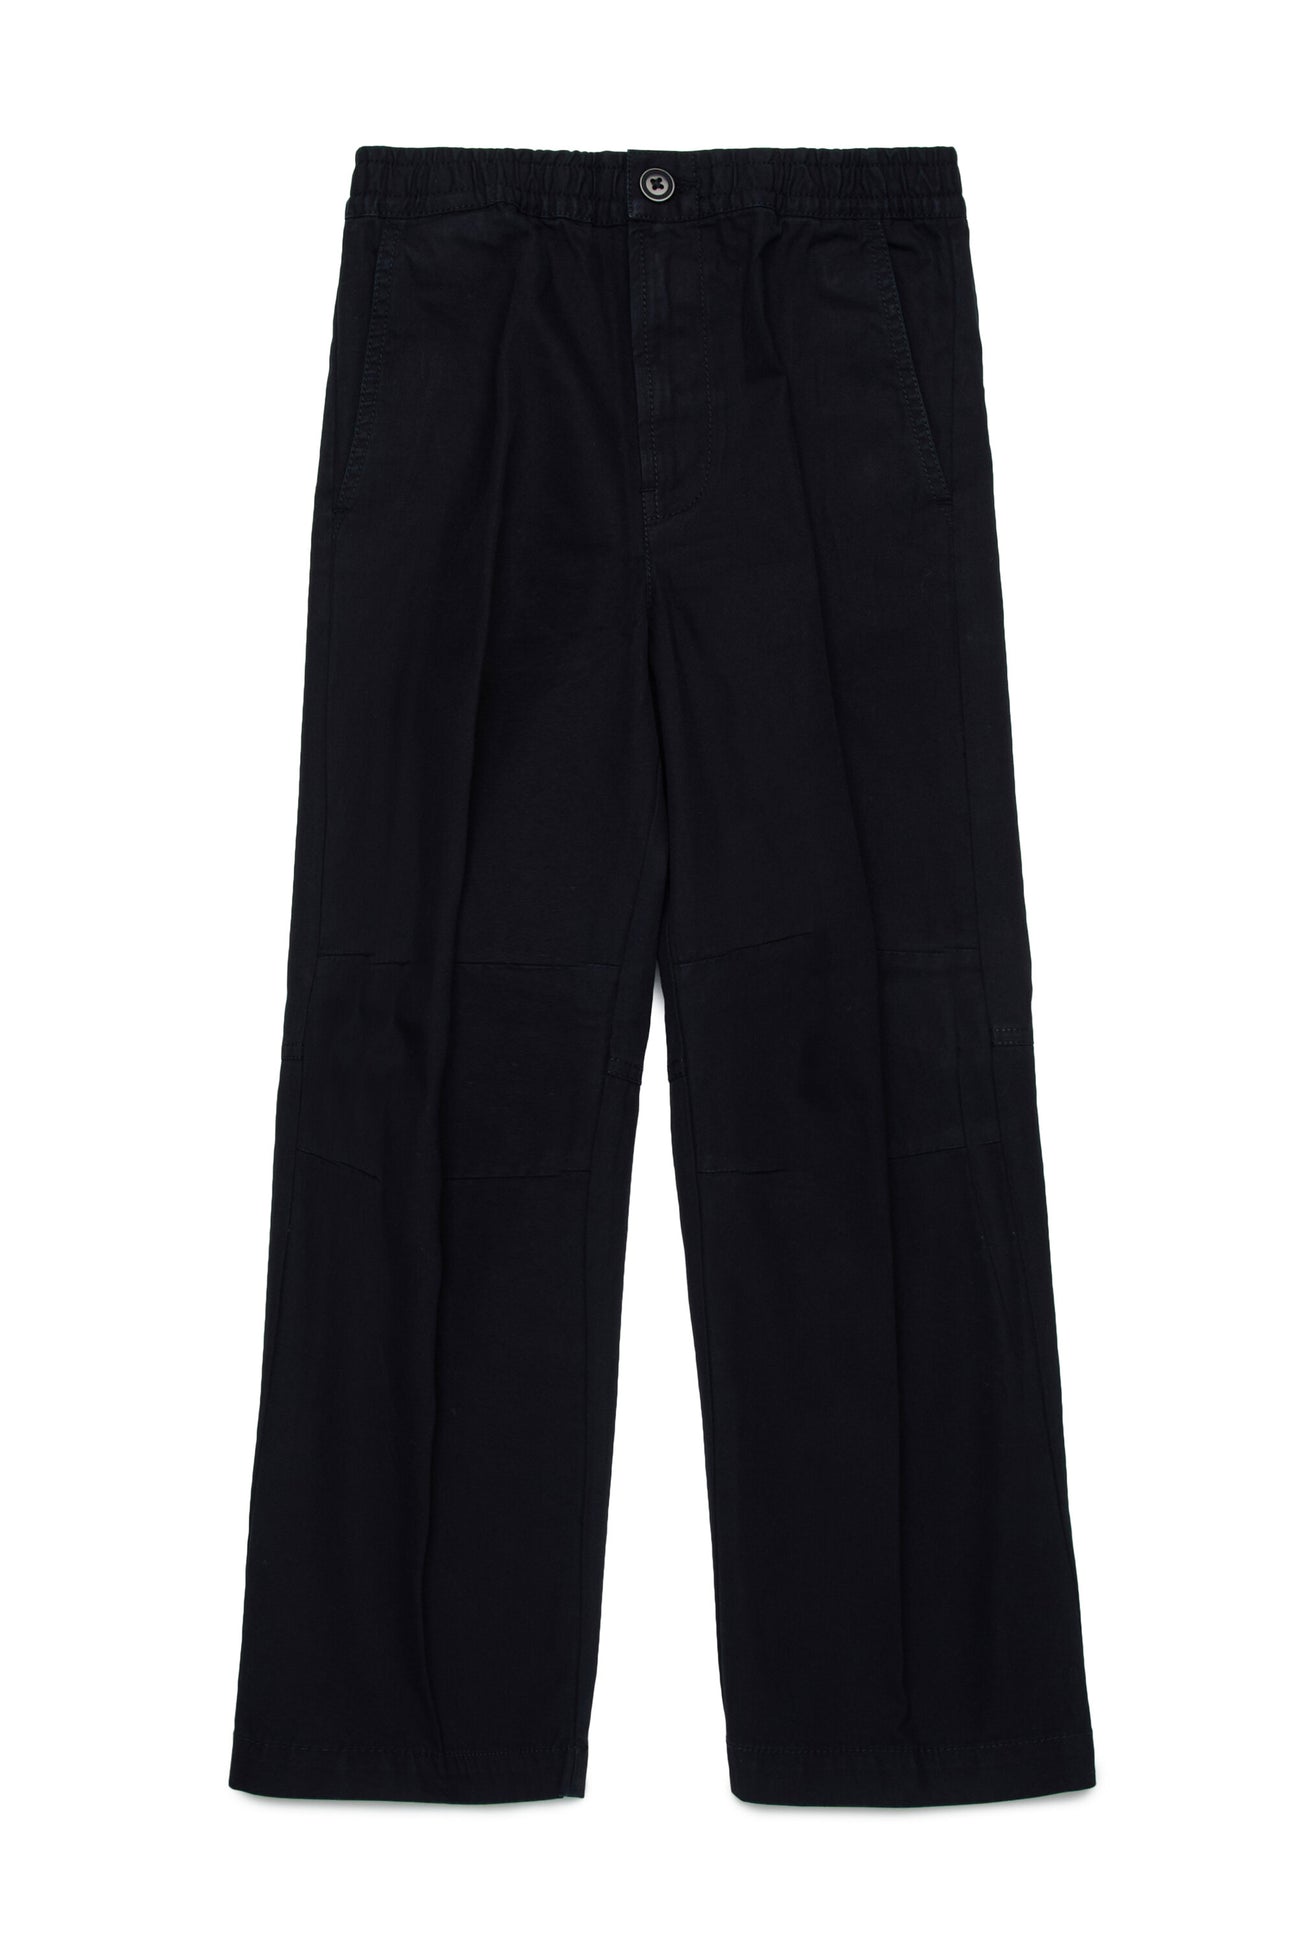 Oval D branded gabardine chino trousers 